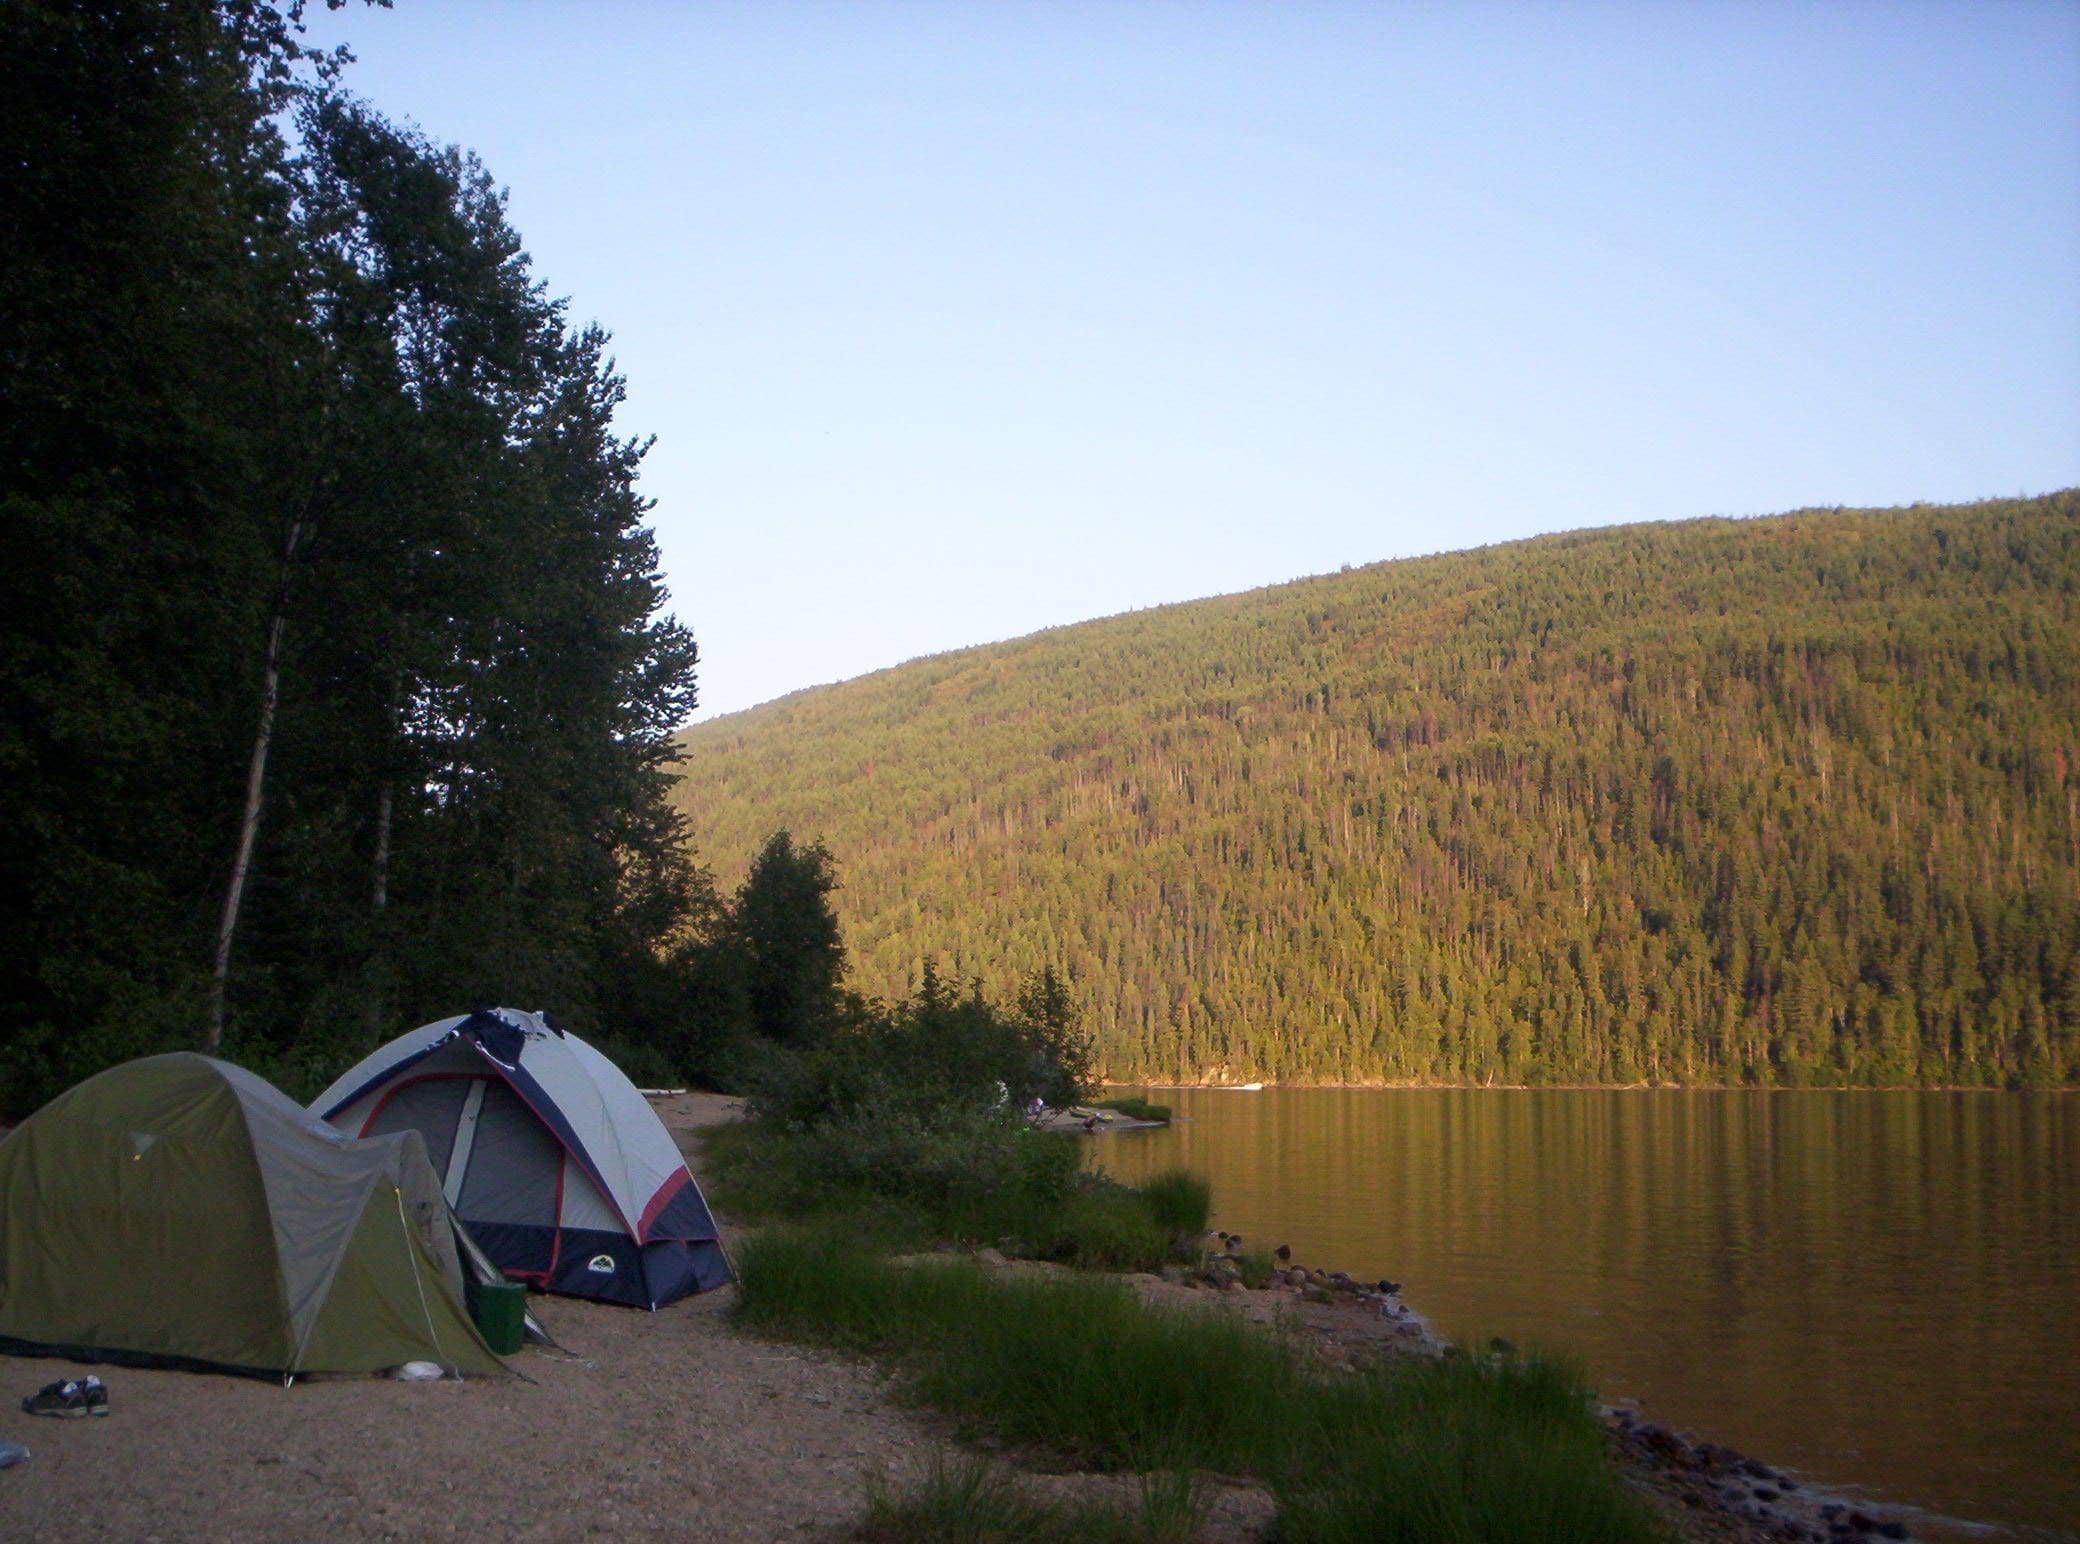 Start planning your camping - reservations open March 15 ...